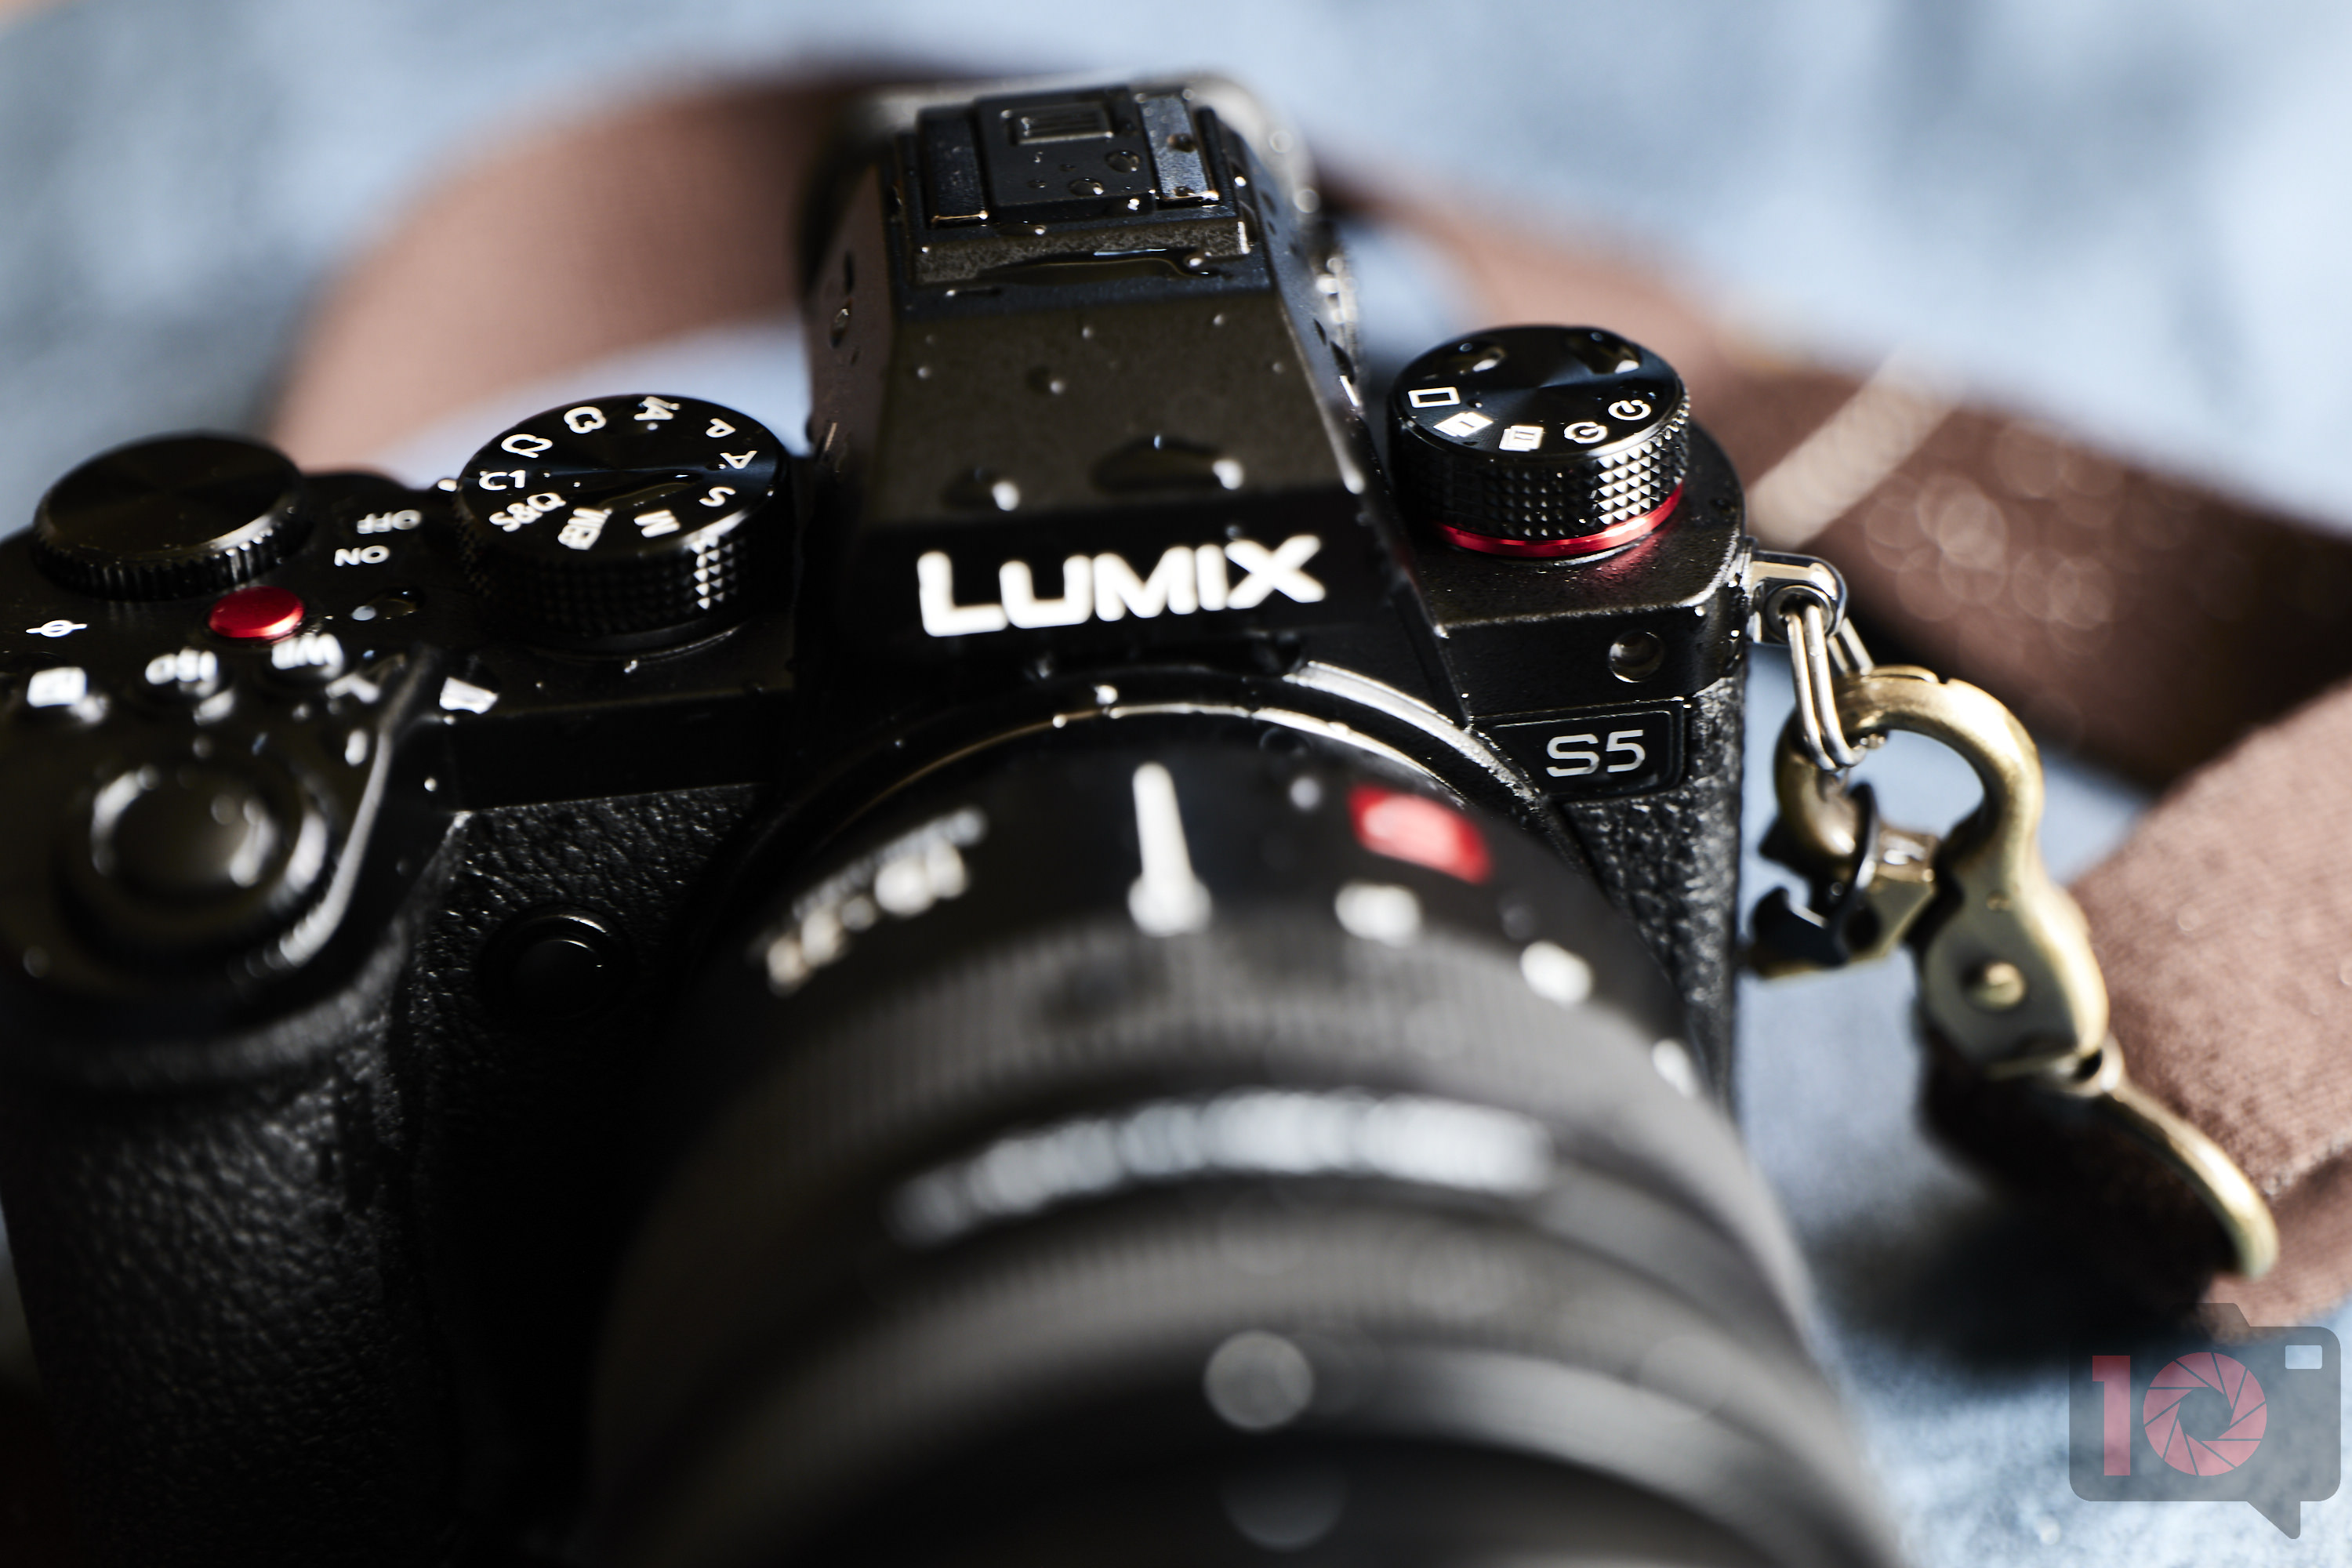 We Can’t Believe the Prices of These Amazing Panasonic Cameras!